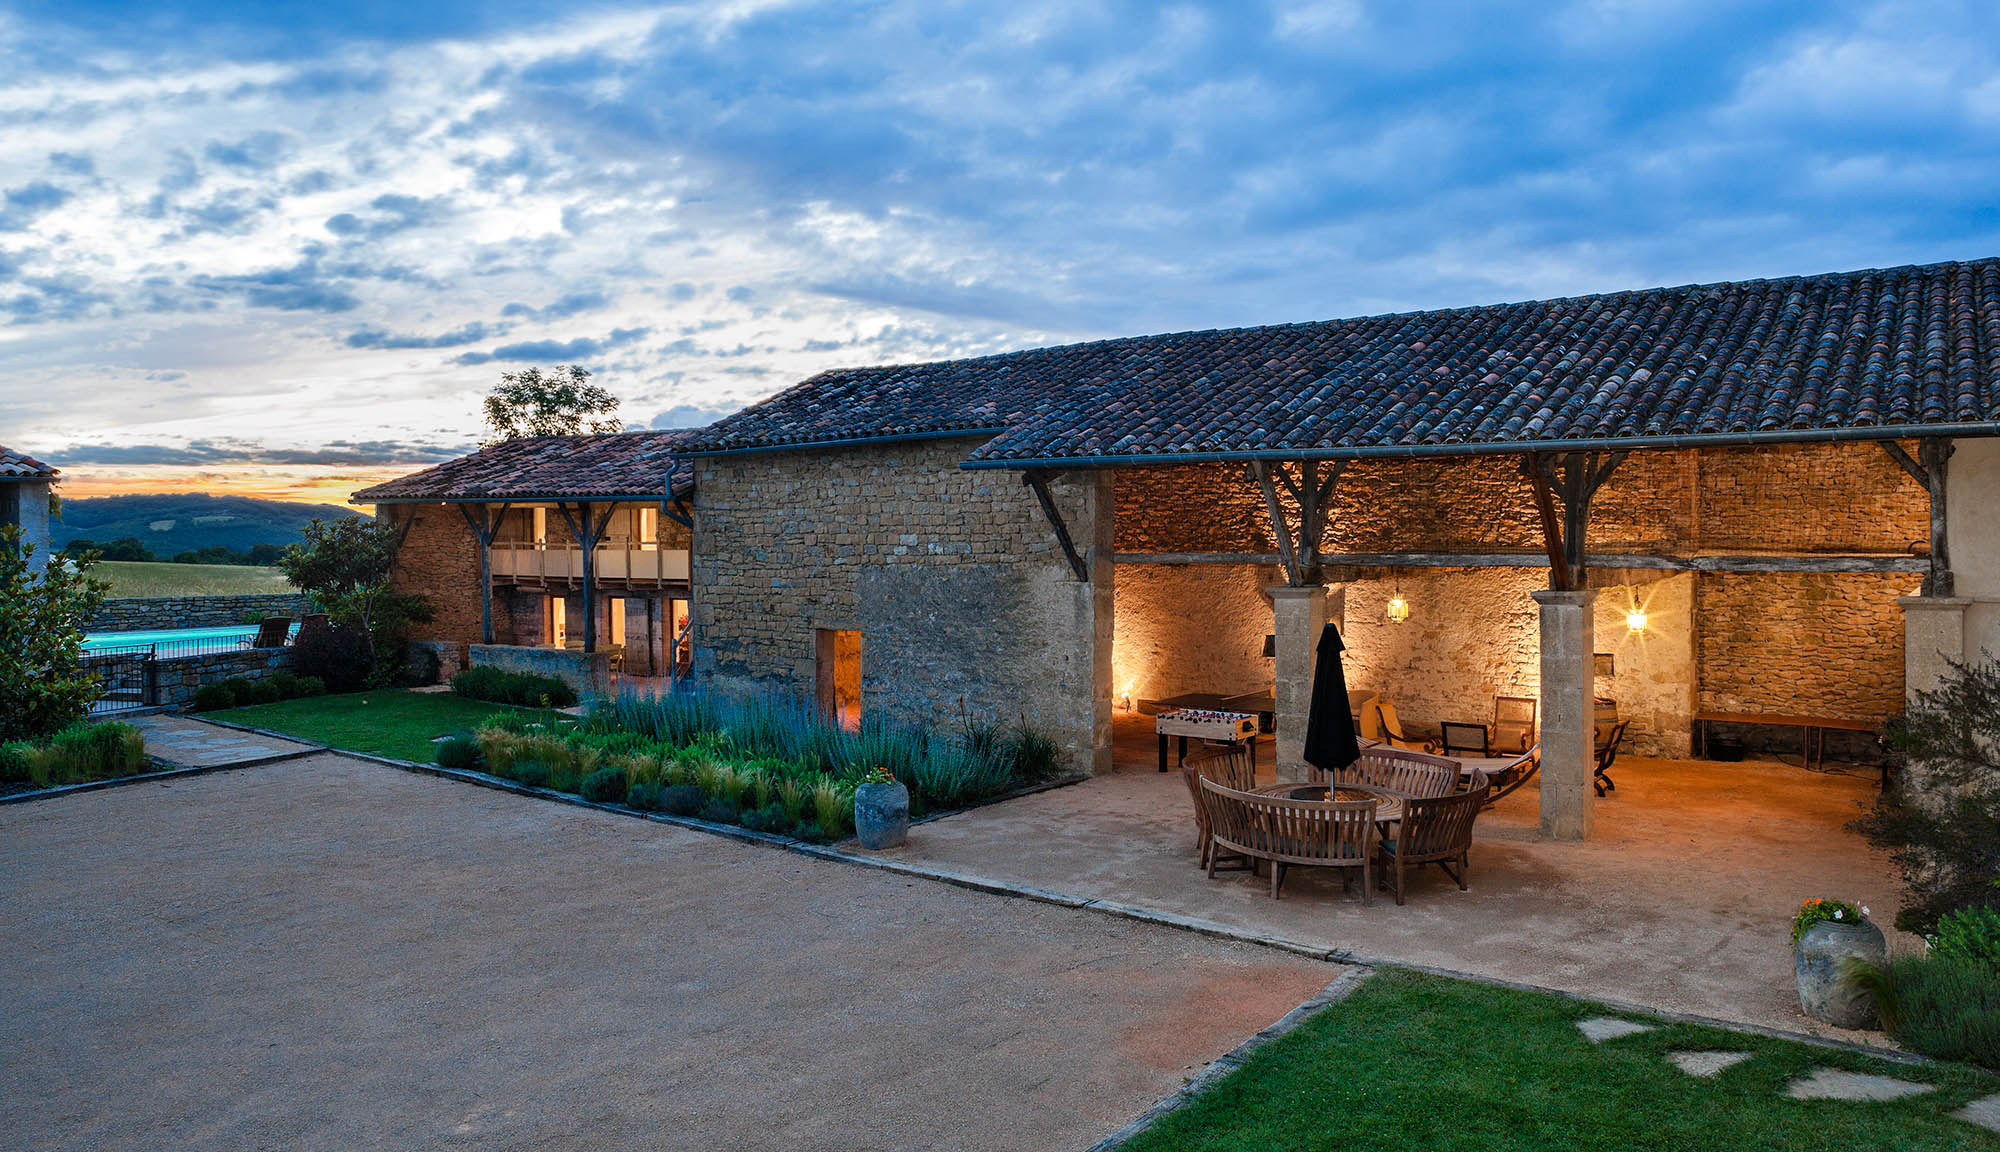 Conversion of existing barn into leisure area and adjoining self-contained house in picturesque French countryside.Client / Architect: Paul Davis